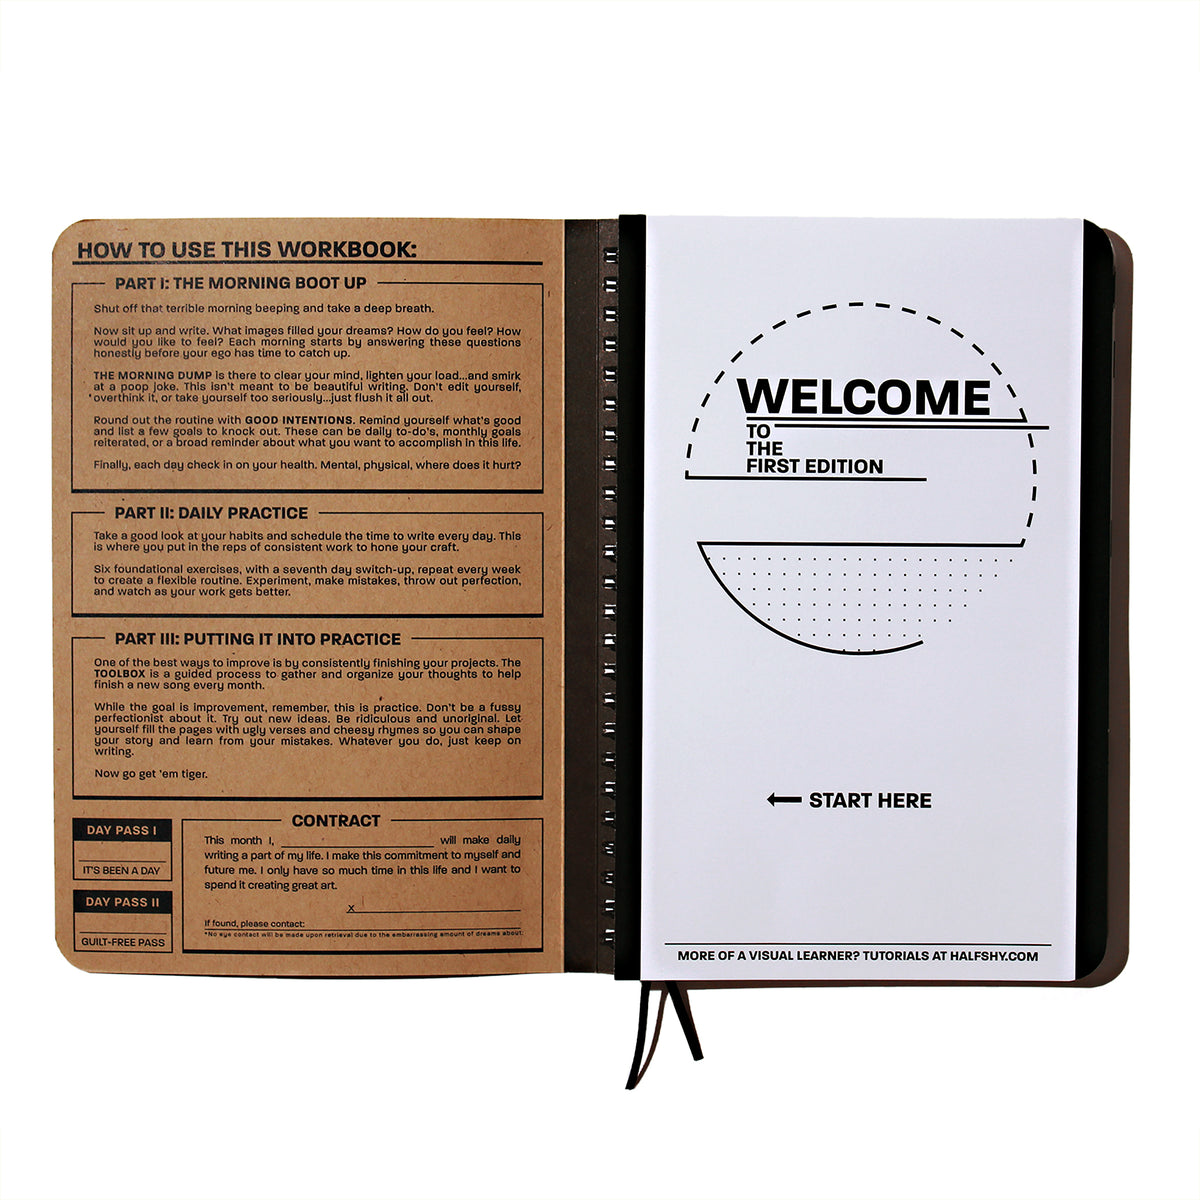 Practice Workbook open to the welcome page front